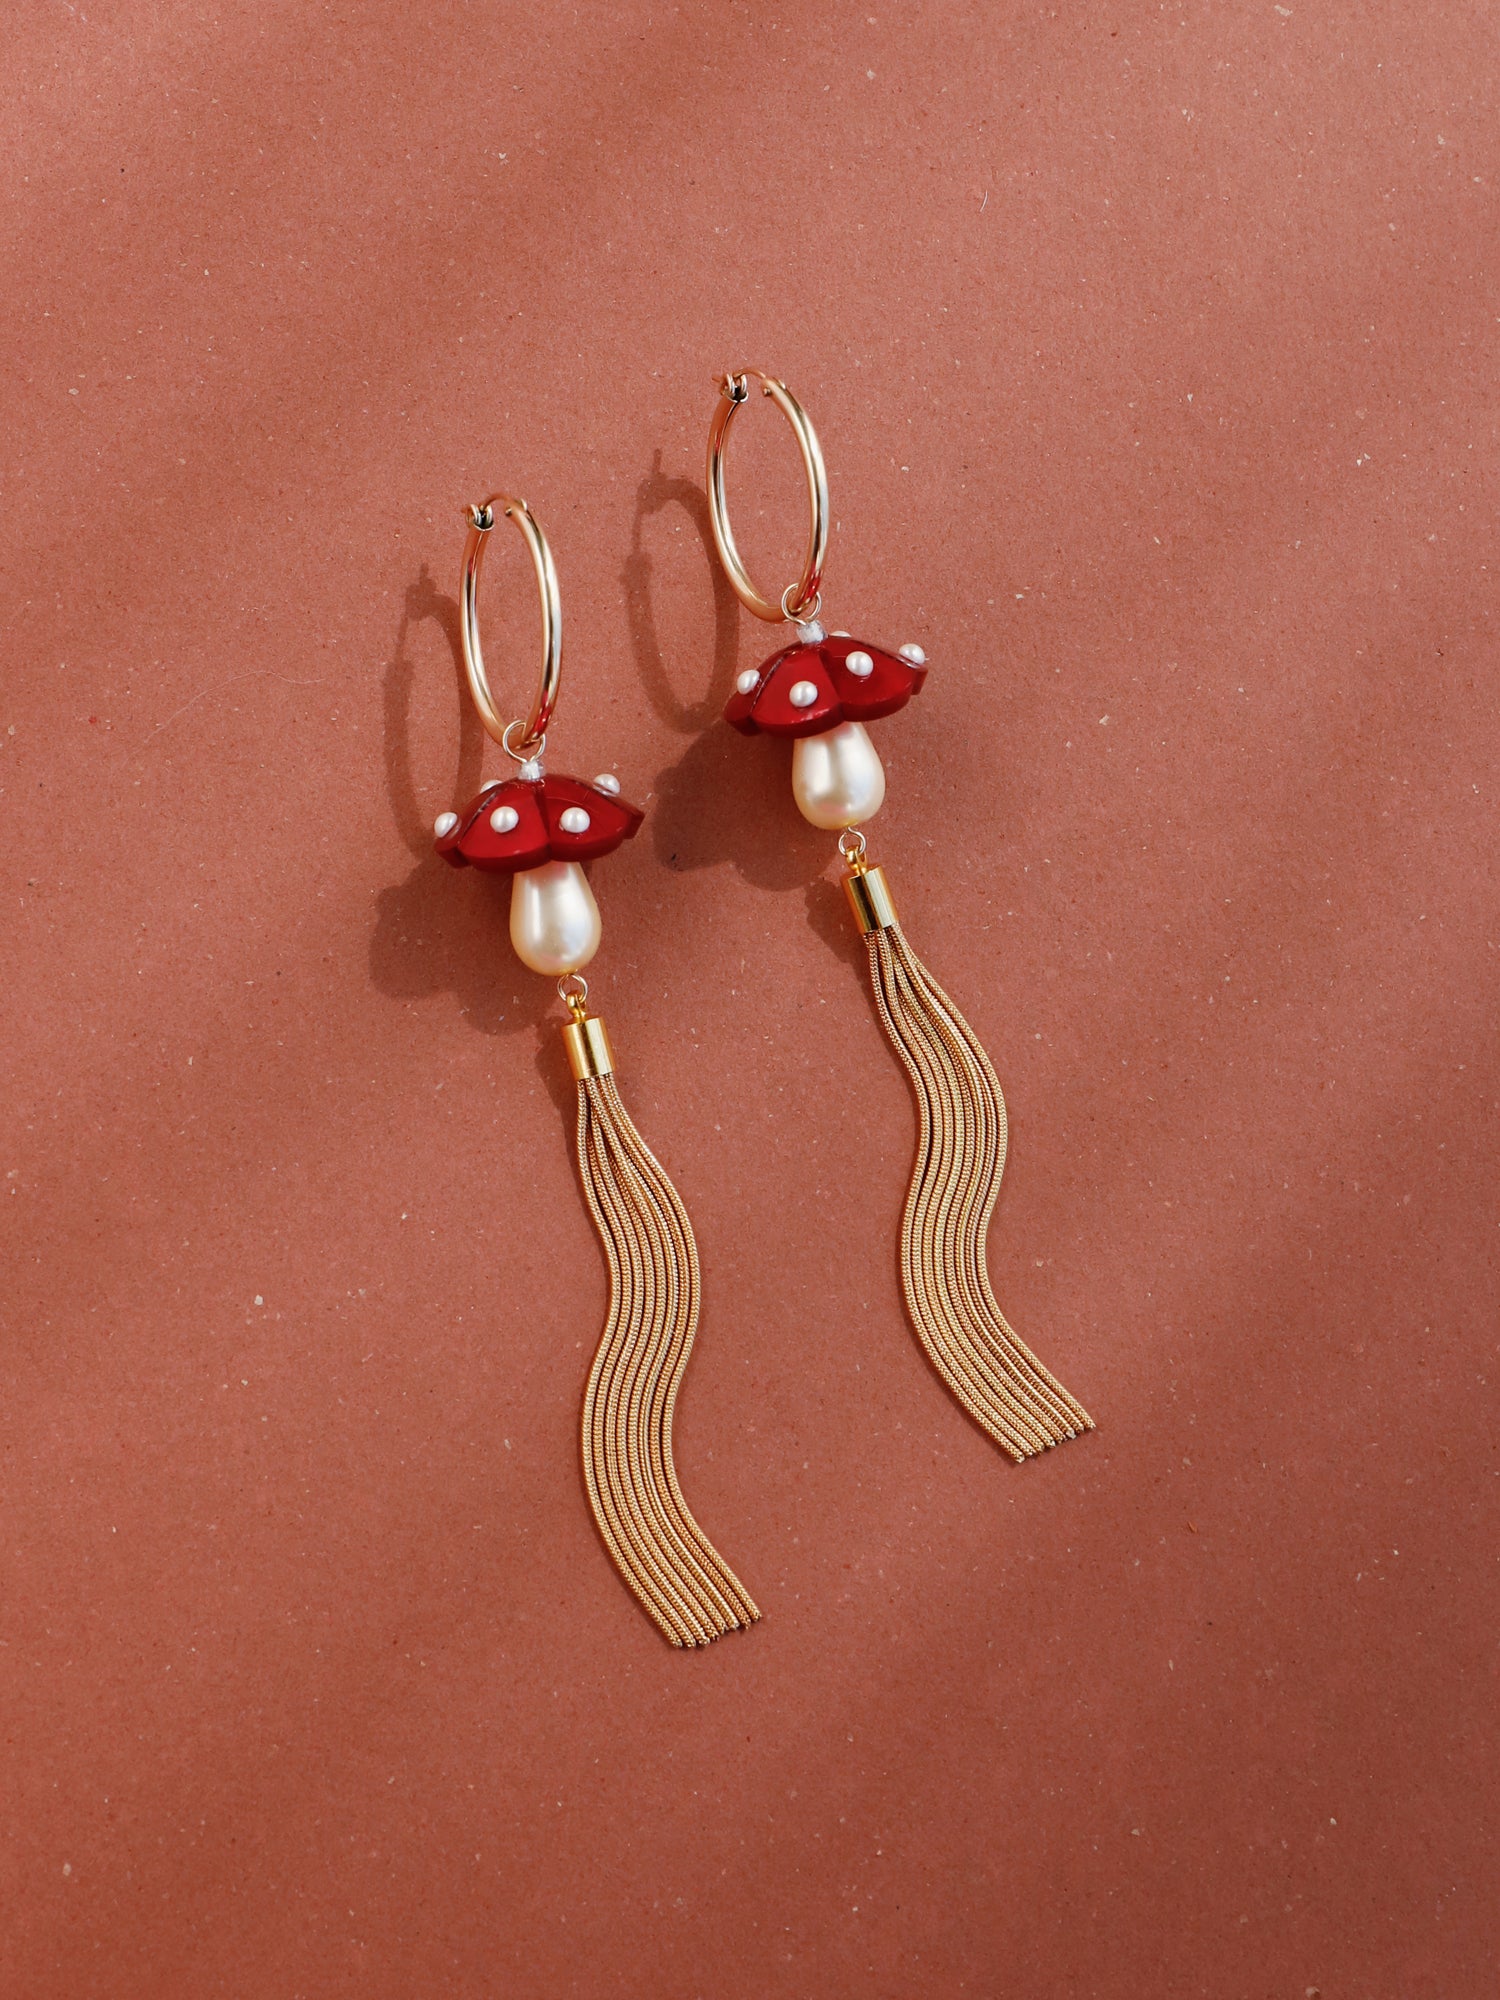 Marbled red acrylic statement mushroom hoops with gold plated snake chain tassels. Finished with high quality Czech glass pearls. Handmade by Wolf & Moon. 